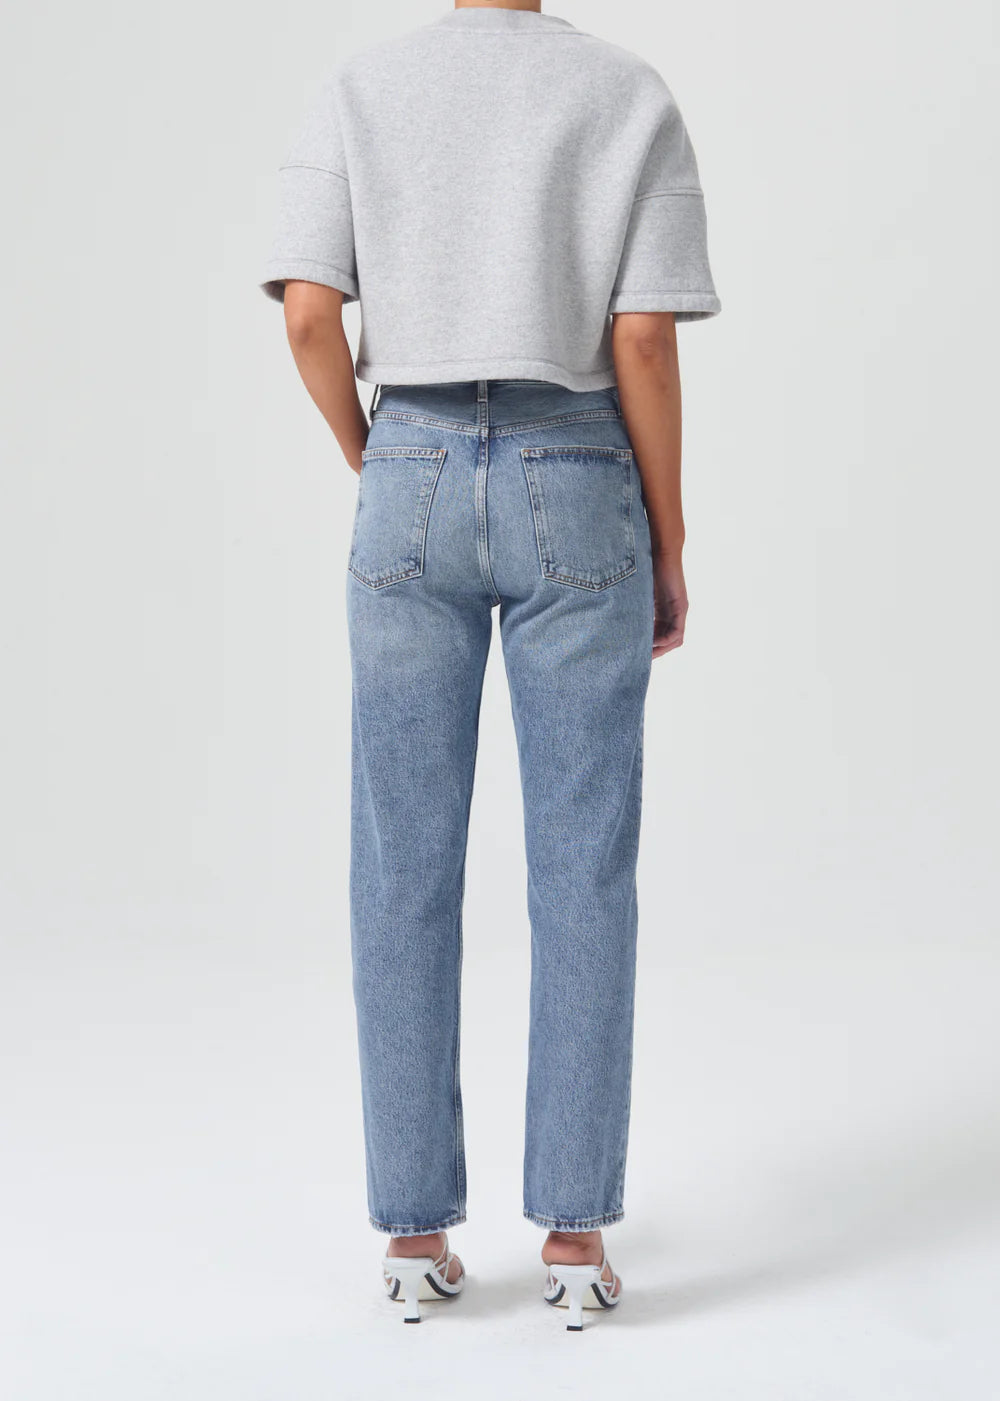 The back view of a woman wearing AGOLDE 90's Pinch Waist - Navigate jeans with a high-rise waist and an organic cotton grey sweater.